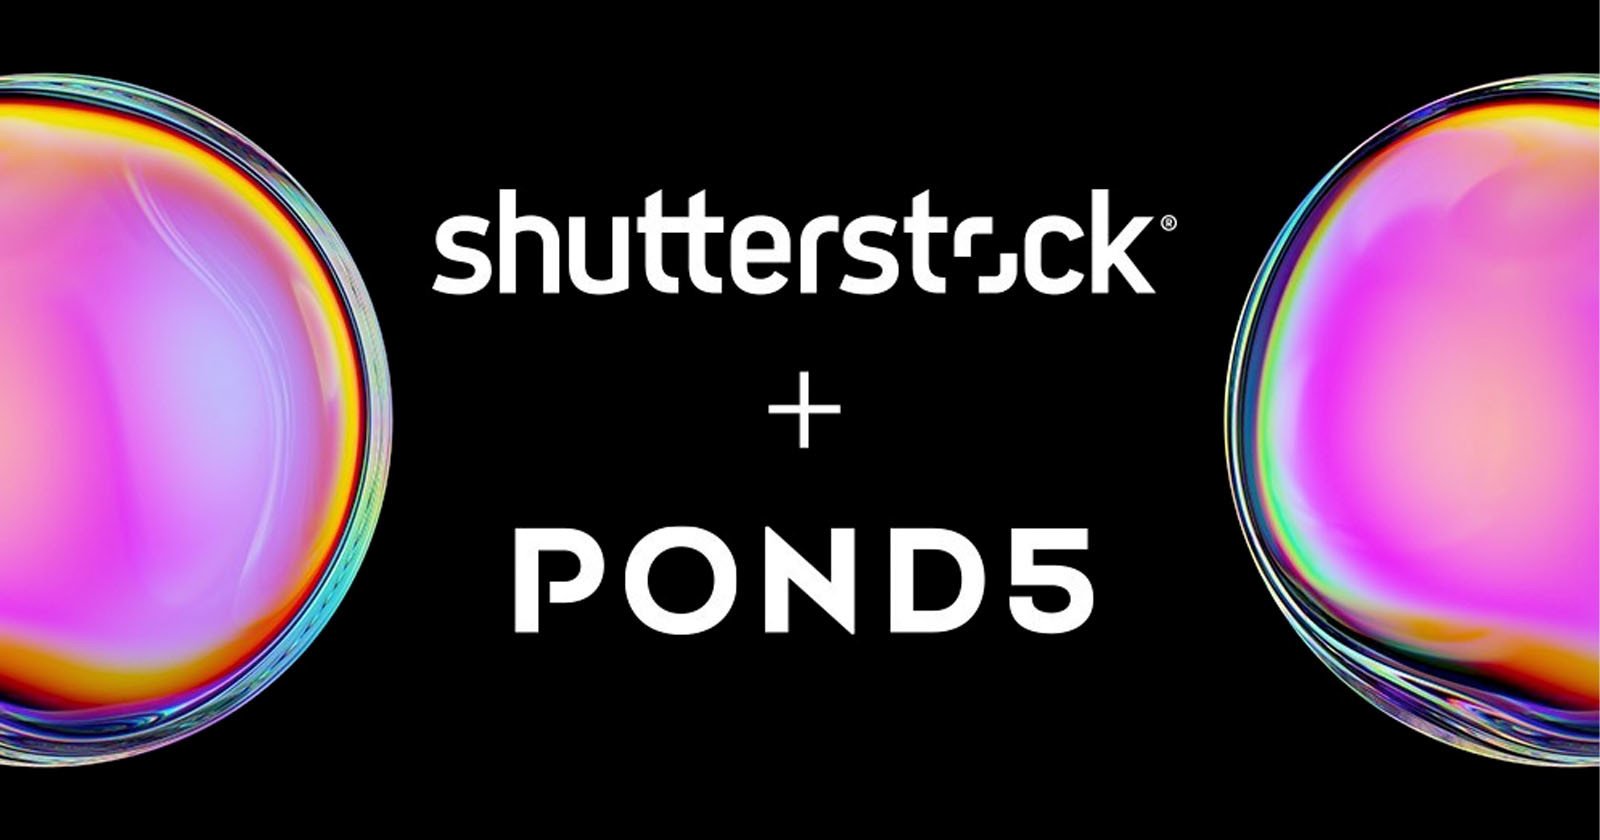 Shutterstock Acquires Pond5 for $210 Million